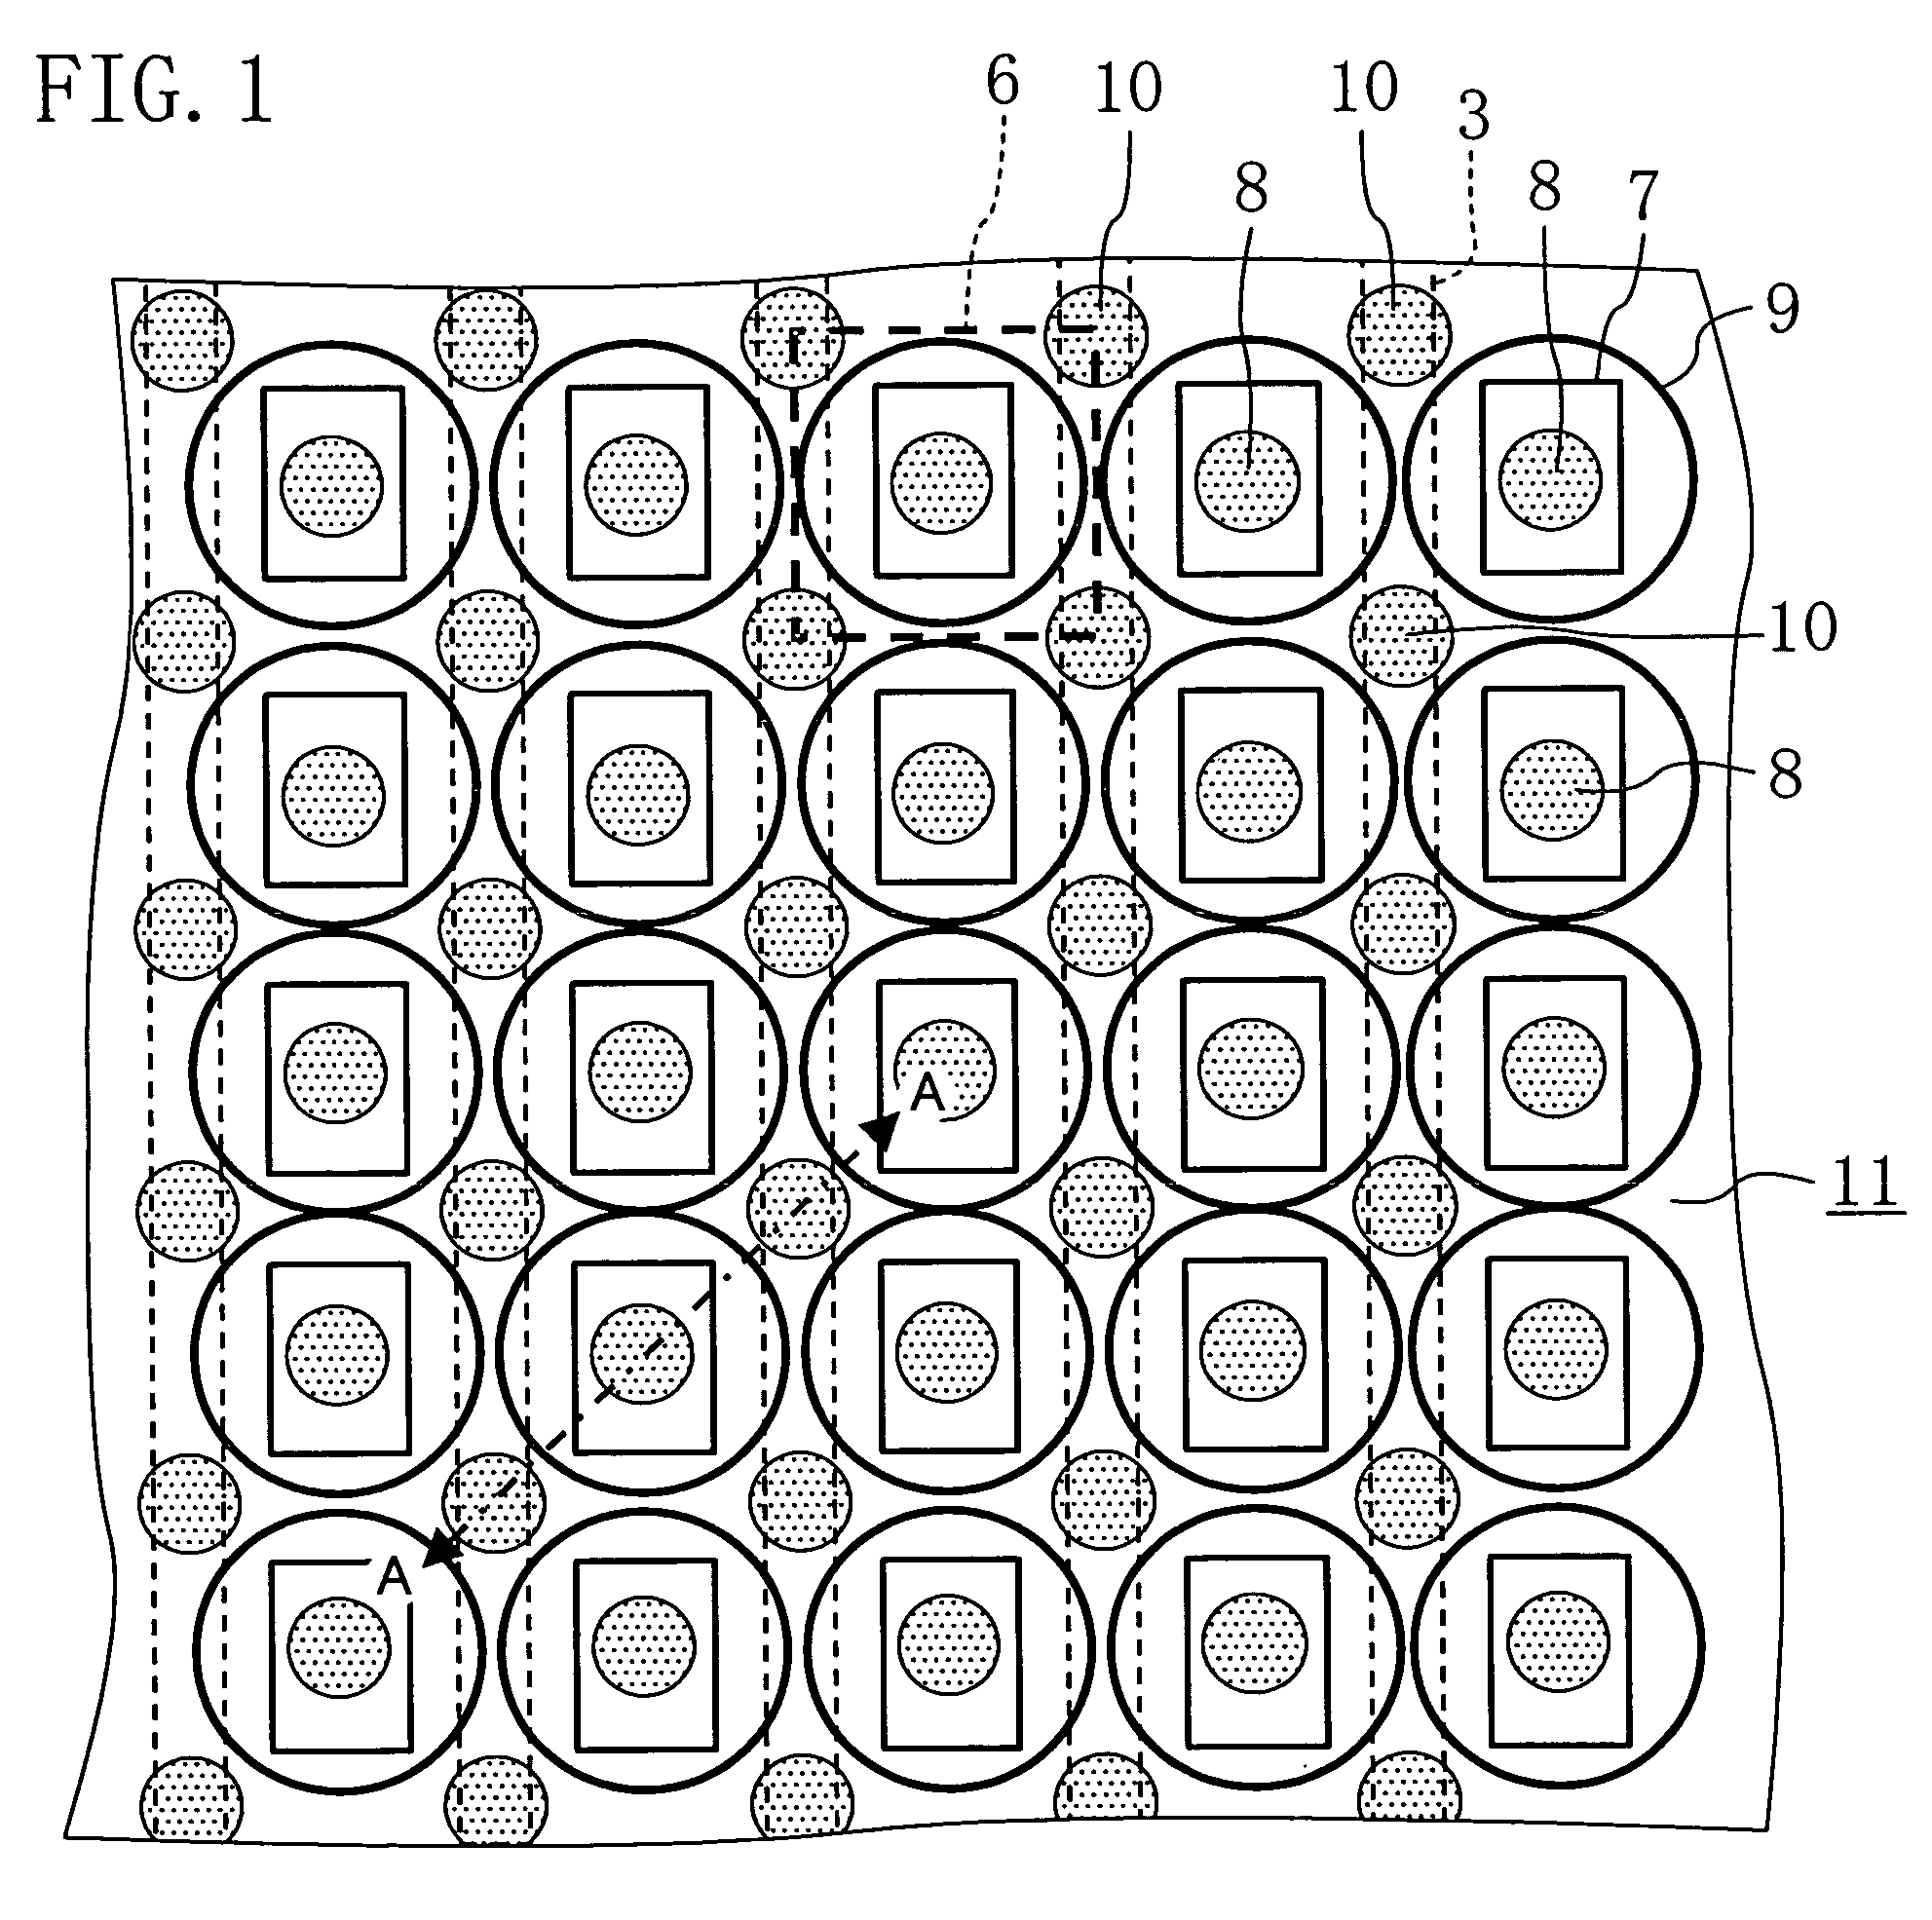 Solid state imaging device and method for manufacturing the same